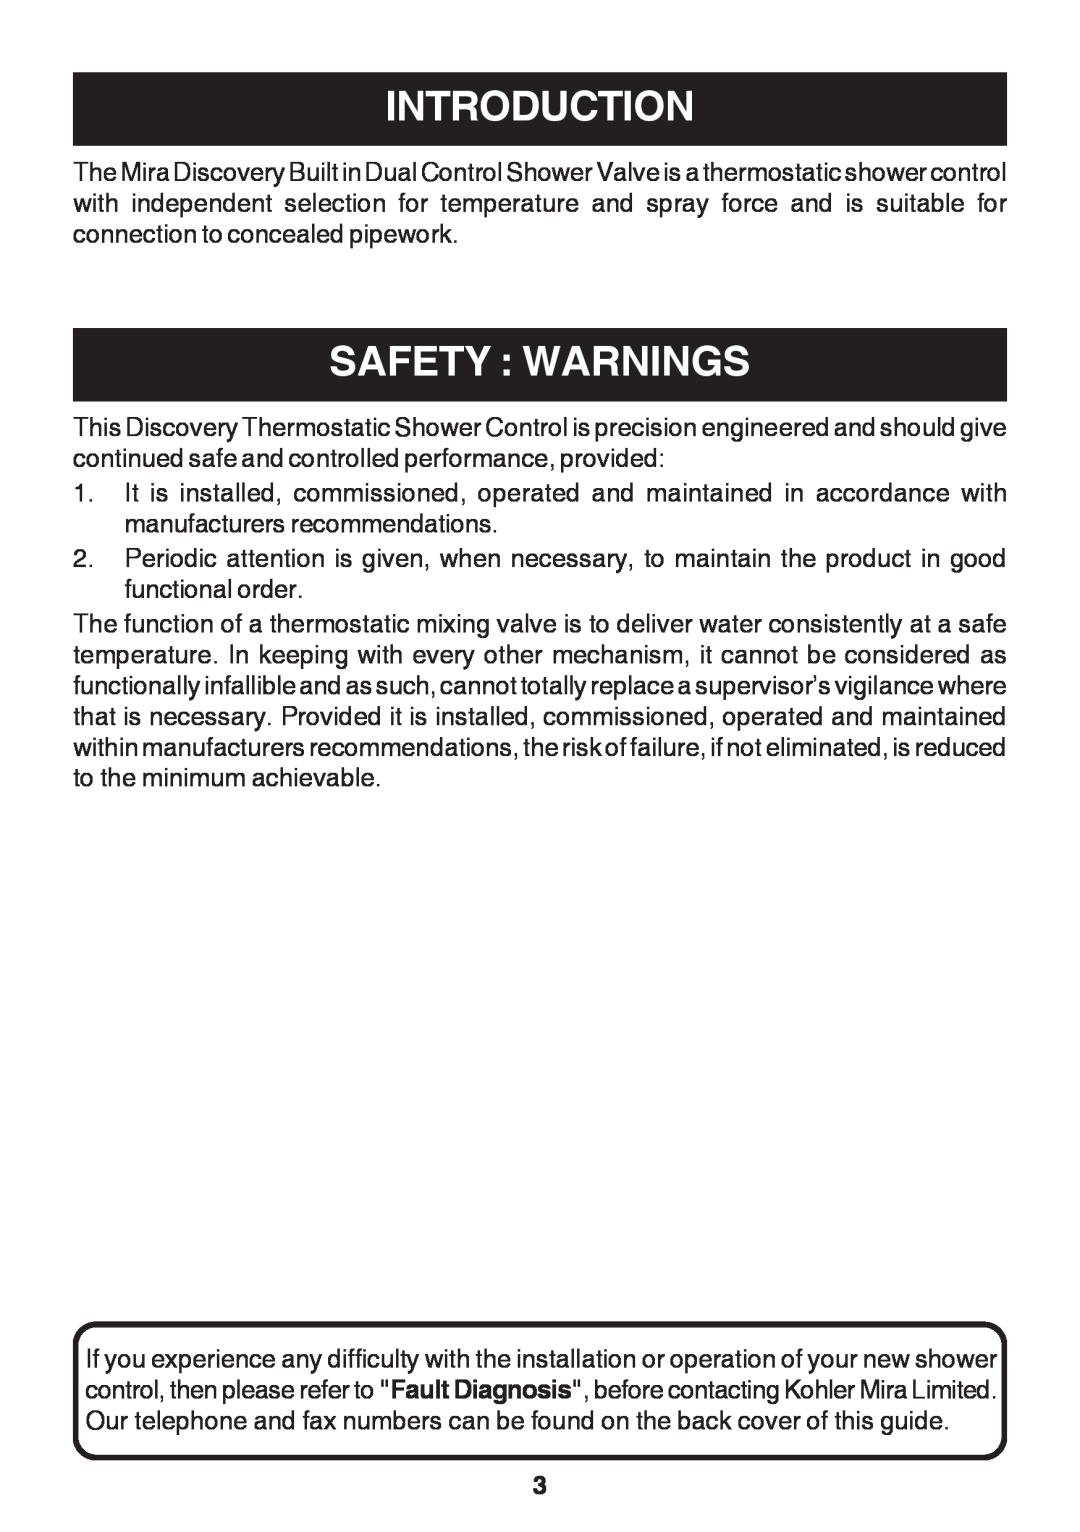 Kohler Discovery manual Introduction, Safety Warnings 